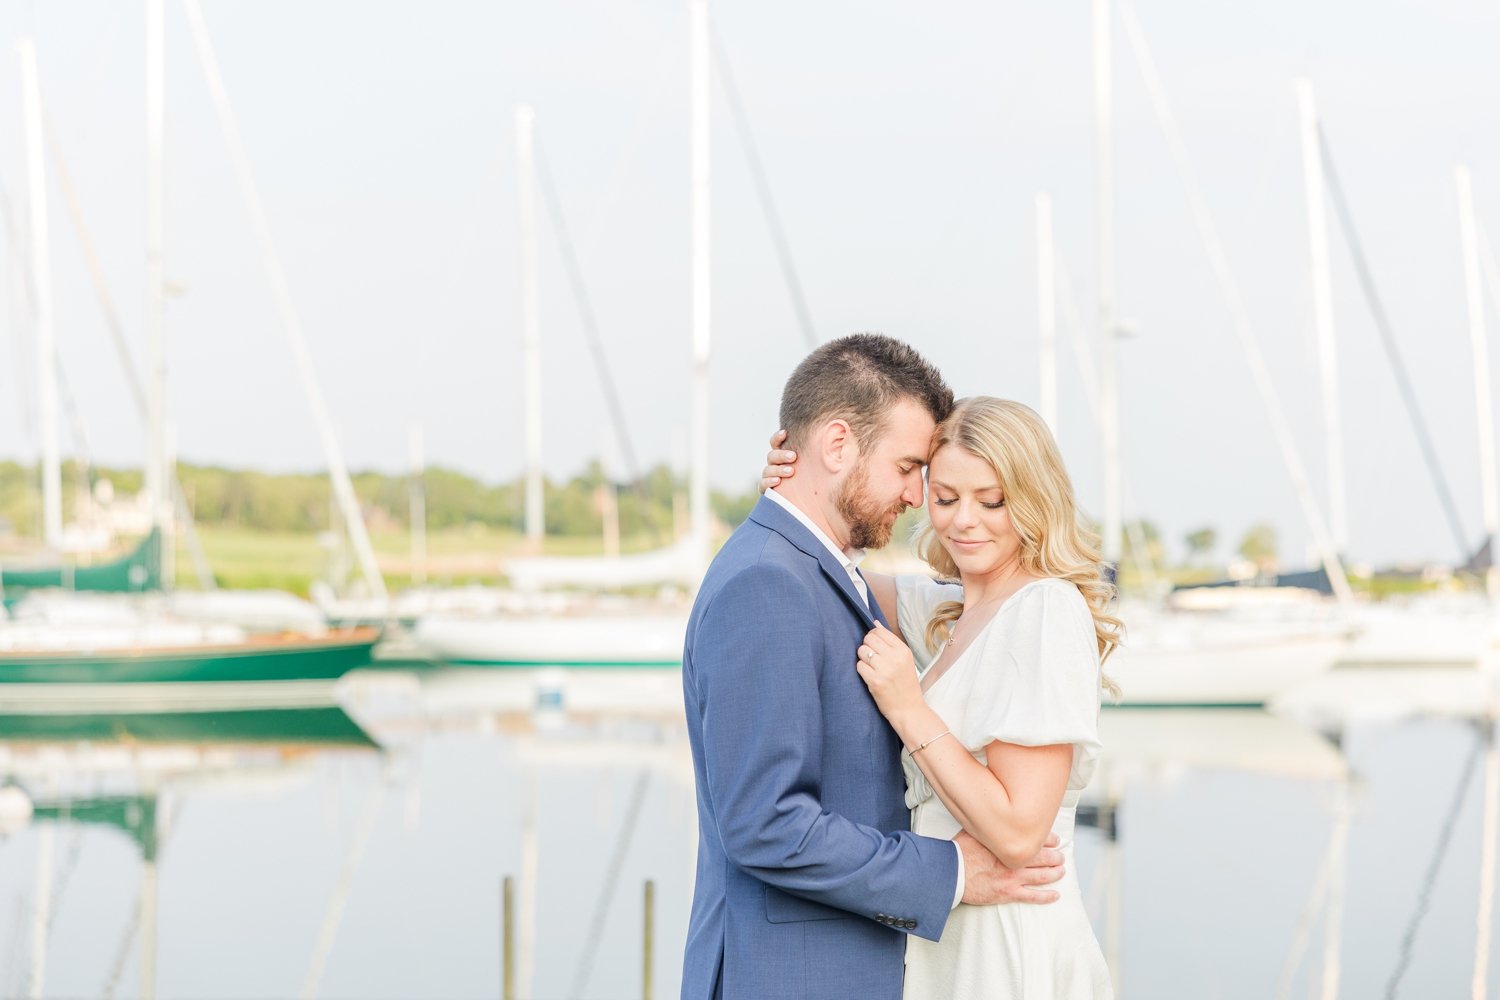 southport-harbor-spring-engagement-session-fairfield-connecticut-wedding-photographer-shaina-lee-photography